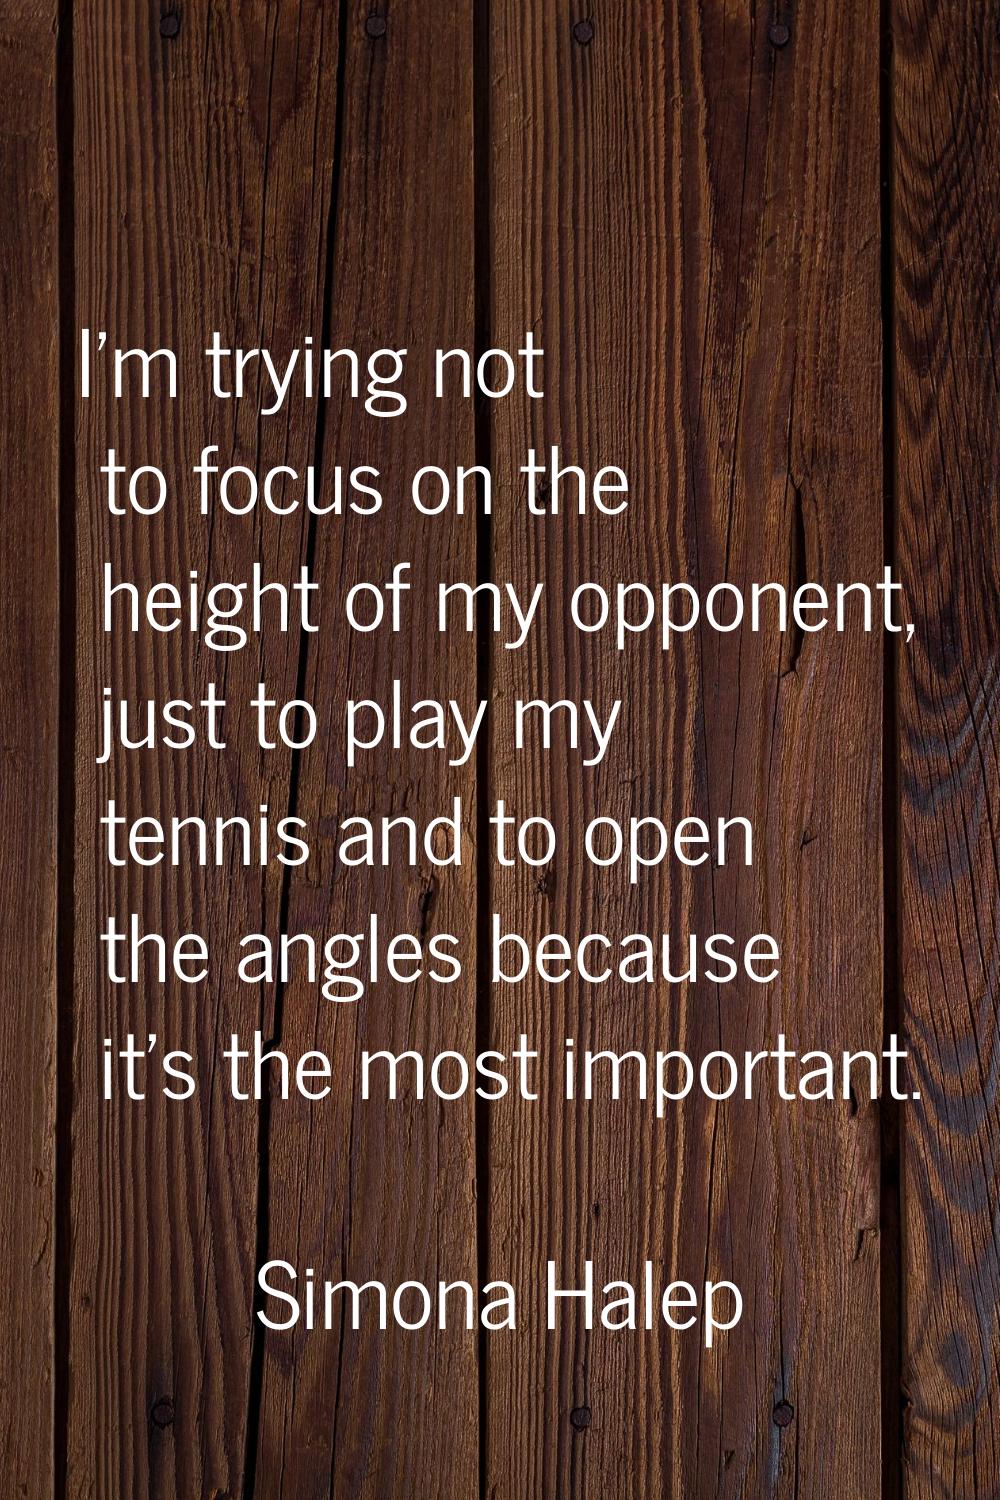 I'm trying not to focus on the height of my opponent, just to play my tennis and to open the angles